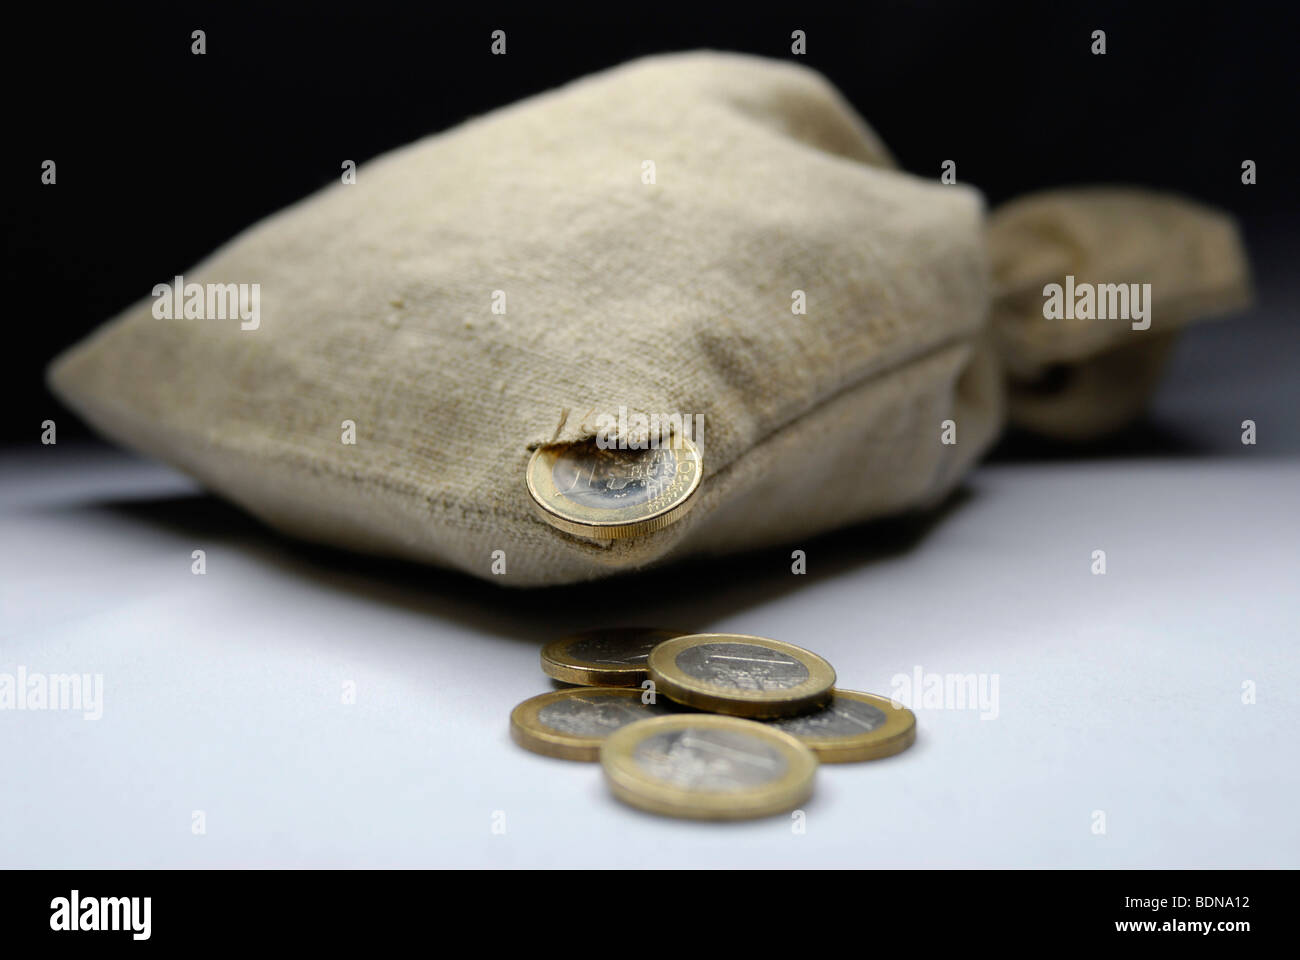 Money bag with hole and euro coins, symbolic image for financial hole, losing money Stock Photo